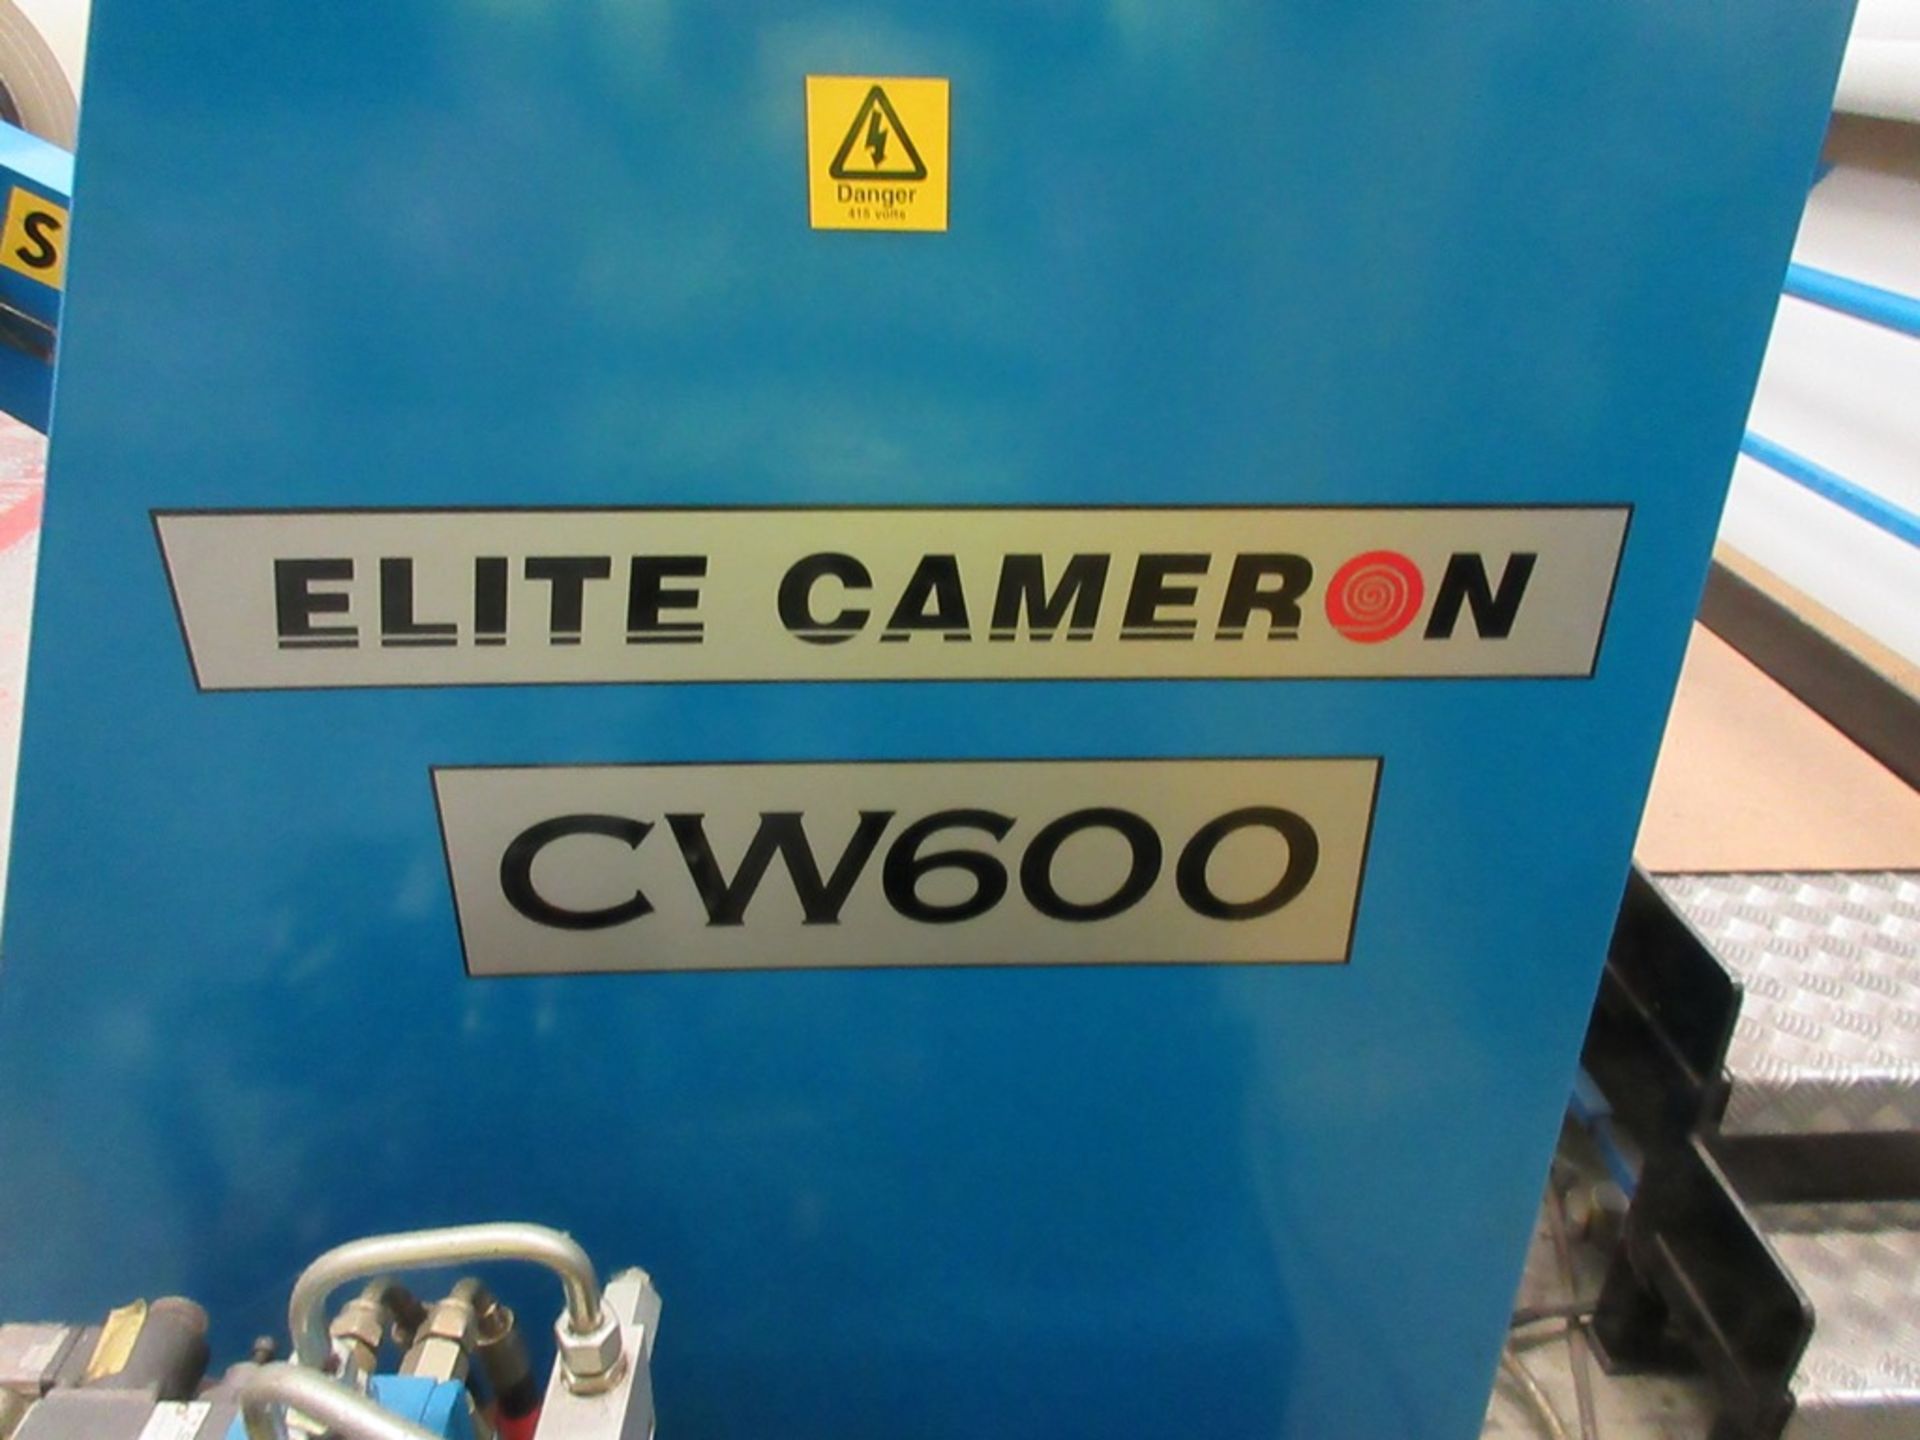 Elite Cameron CW600 automatic slitting machine, s/n: MO2030 (2001), capacity 3000kg with - - Image 5 of 16